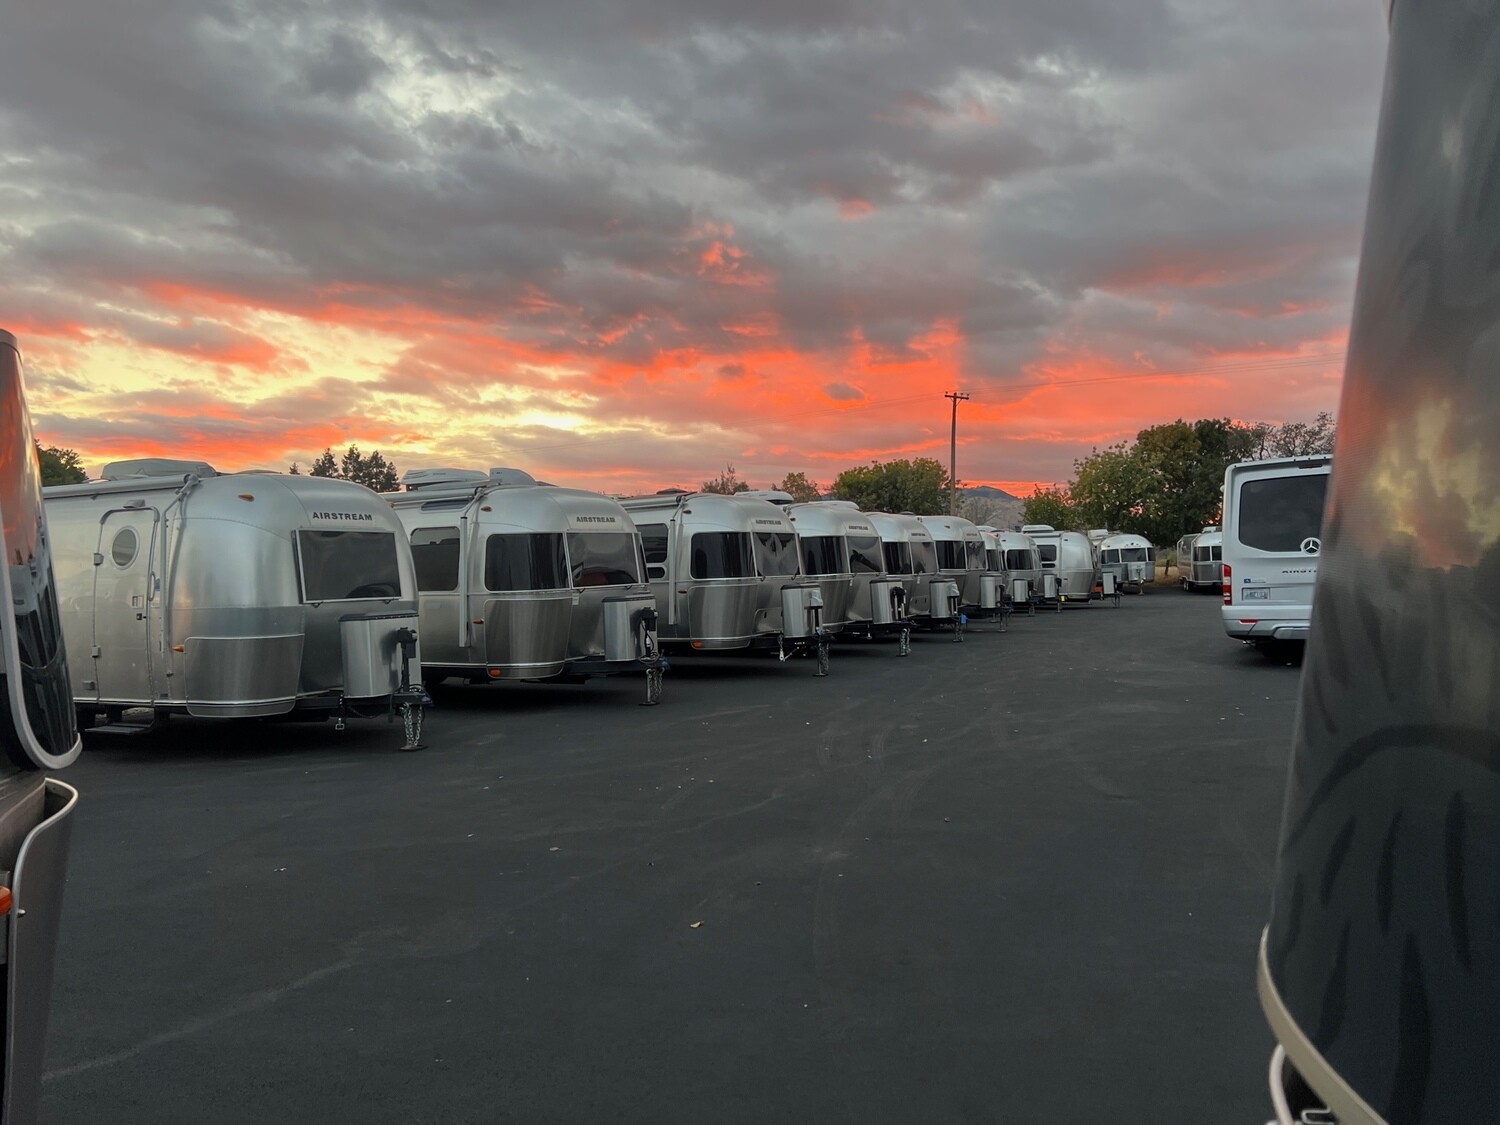 DO YOU WANT TO SELL YOUR AIRSTREAM?